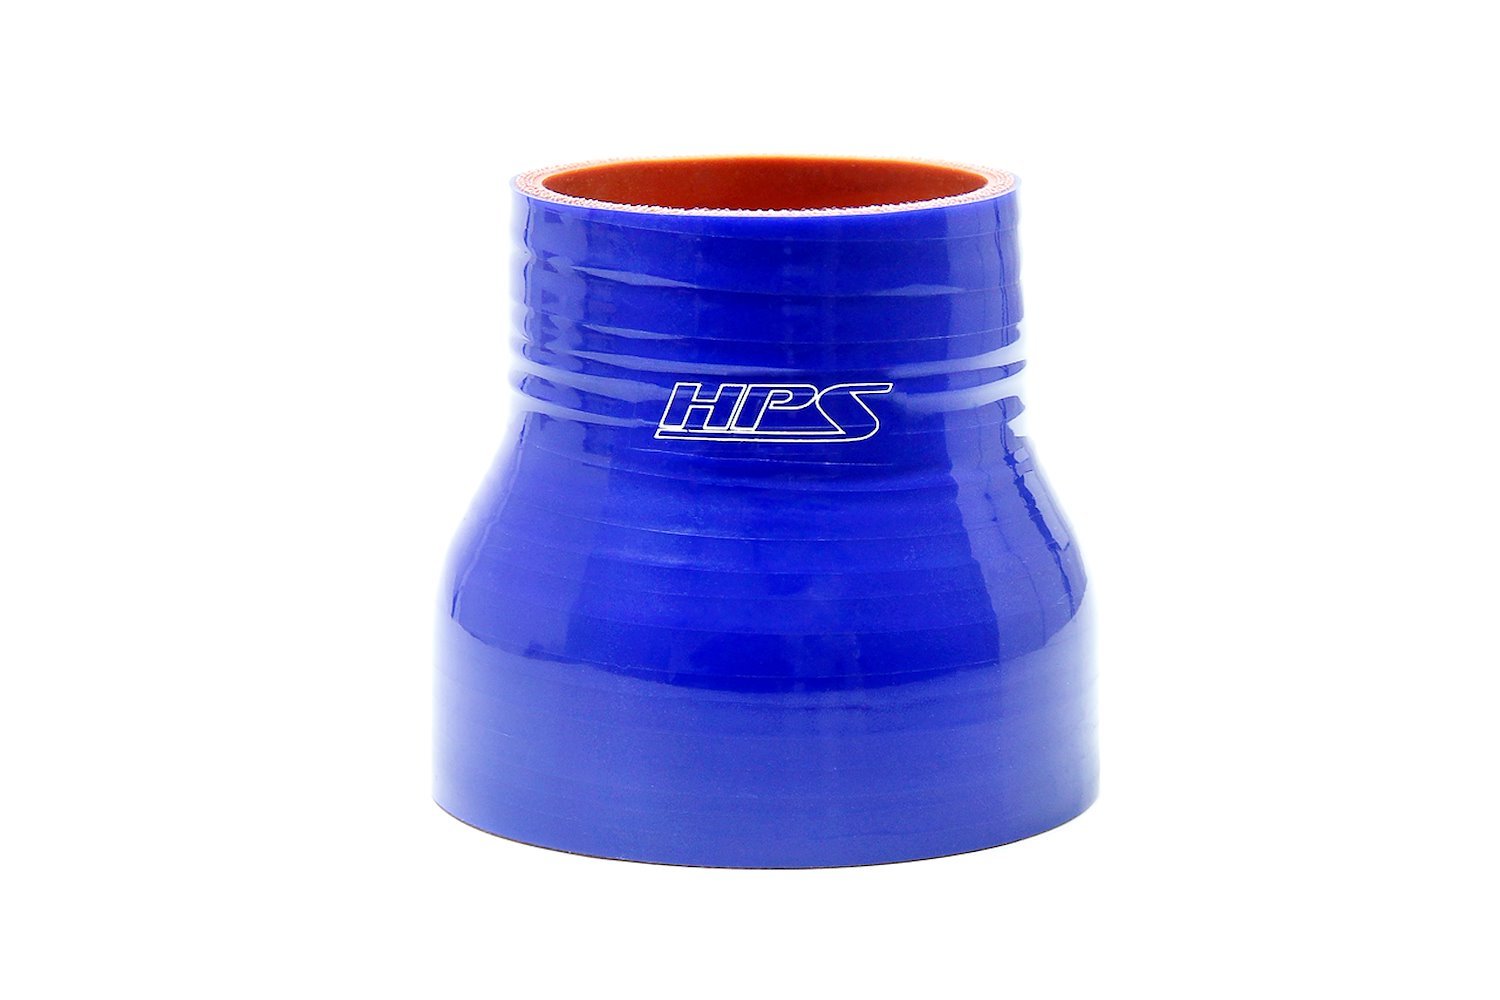 HTSR-275-400-BLUE Silicone Reducer Hose, High-Temp 4-Ply Reinforced, 2-3/4 in. - 4 in. ID, 3 in. Long, Blue